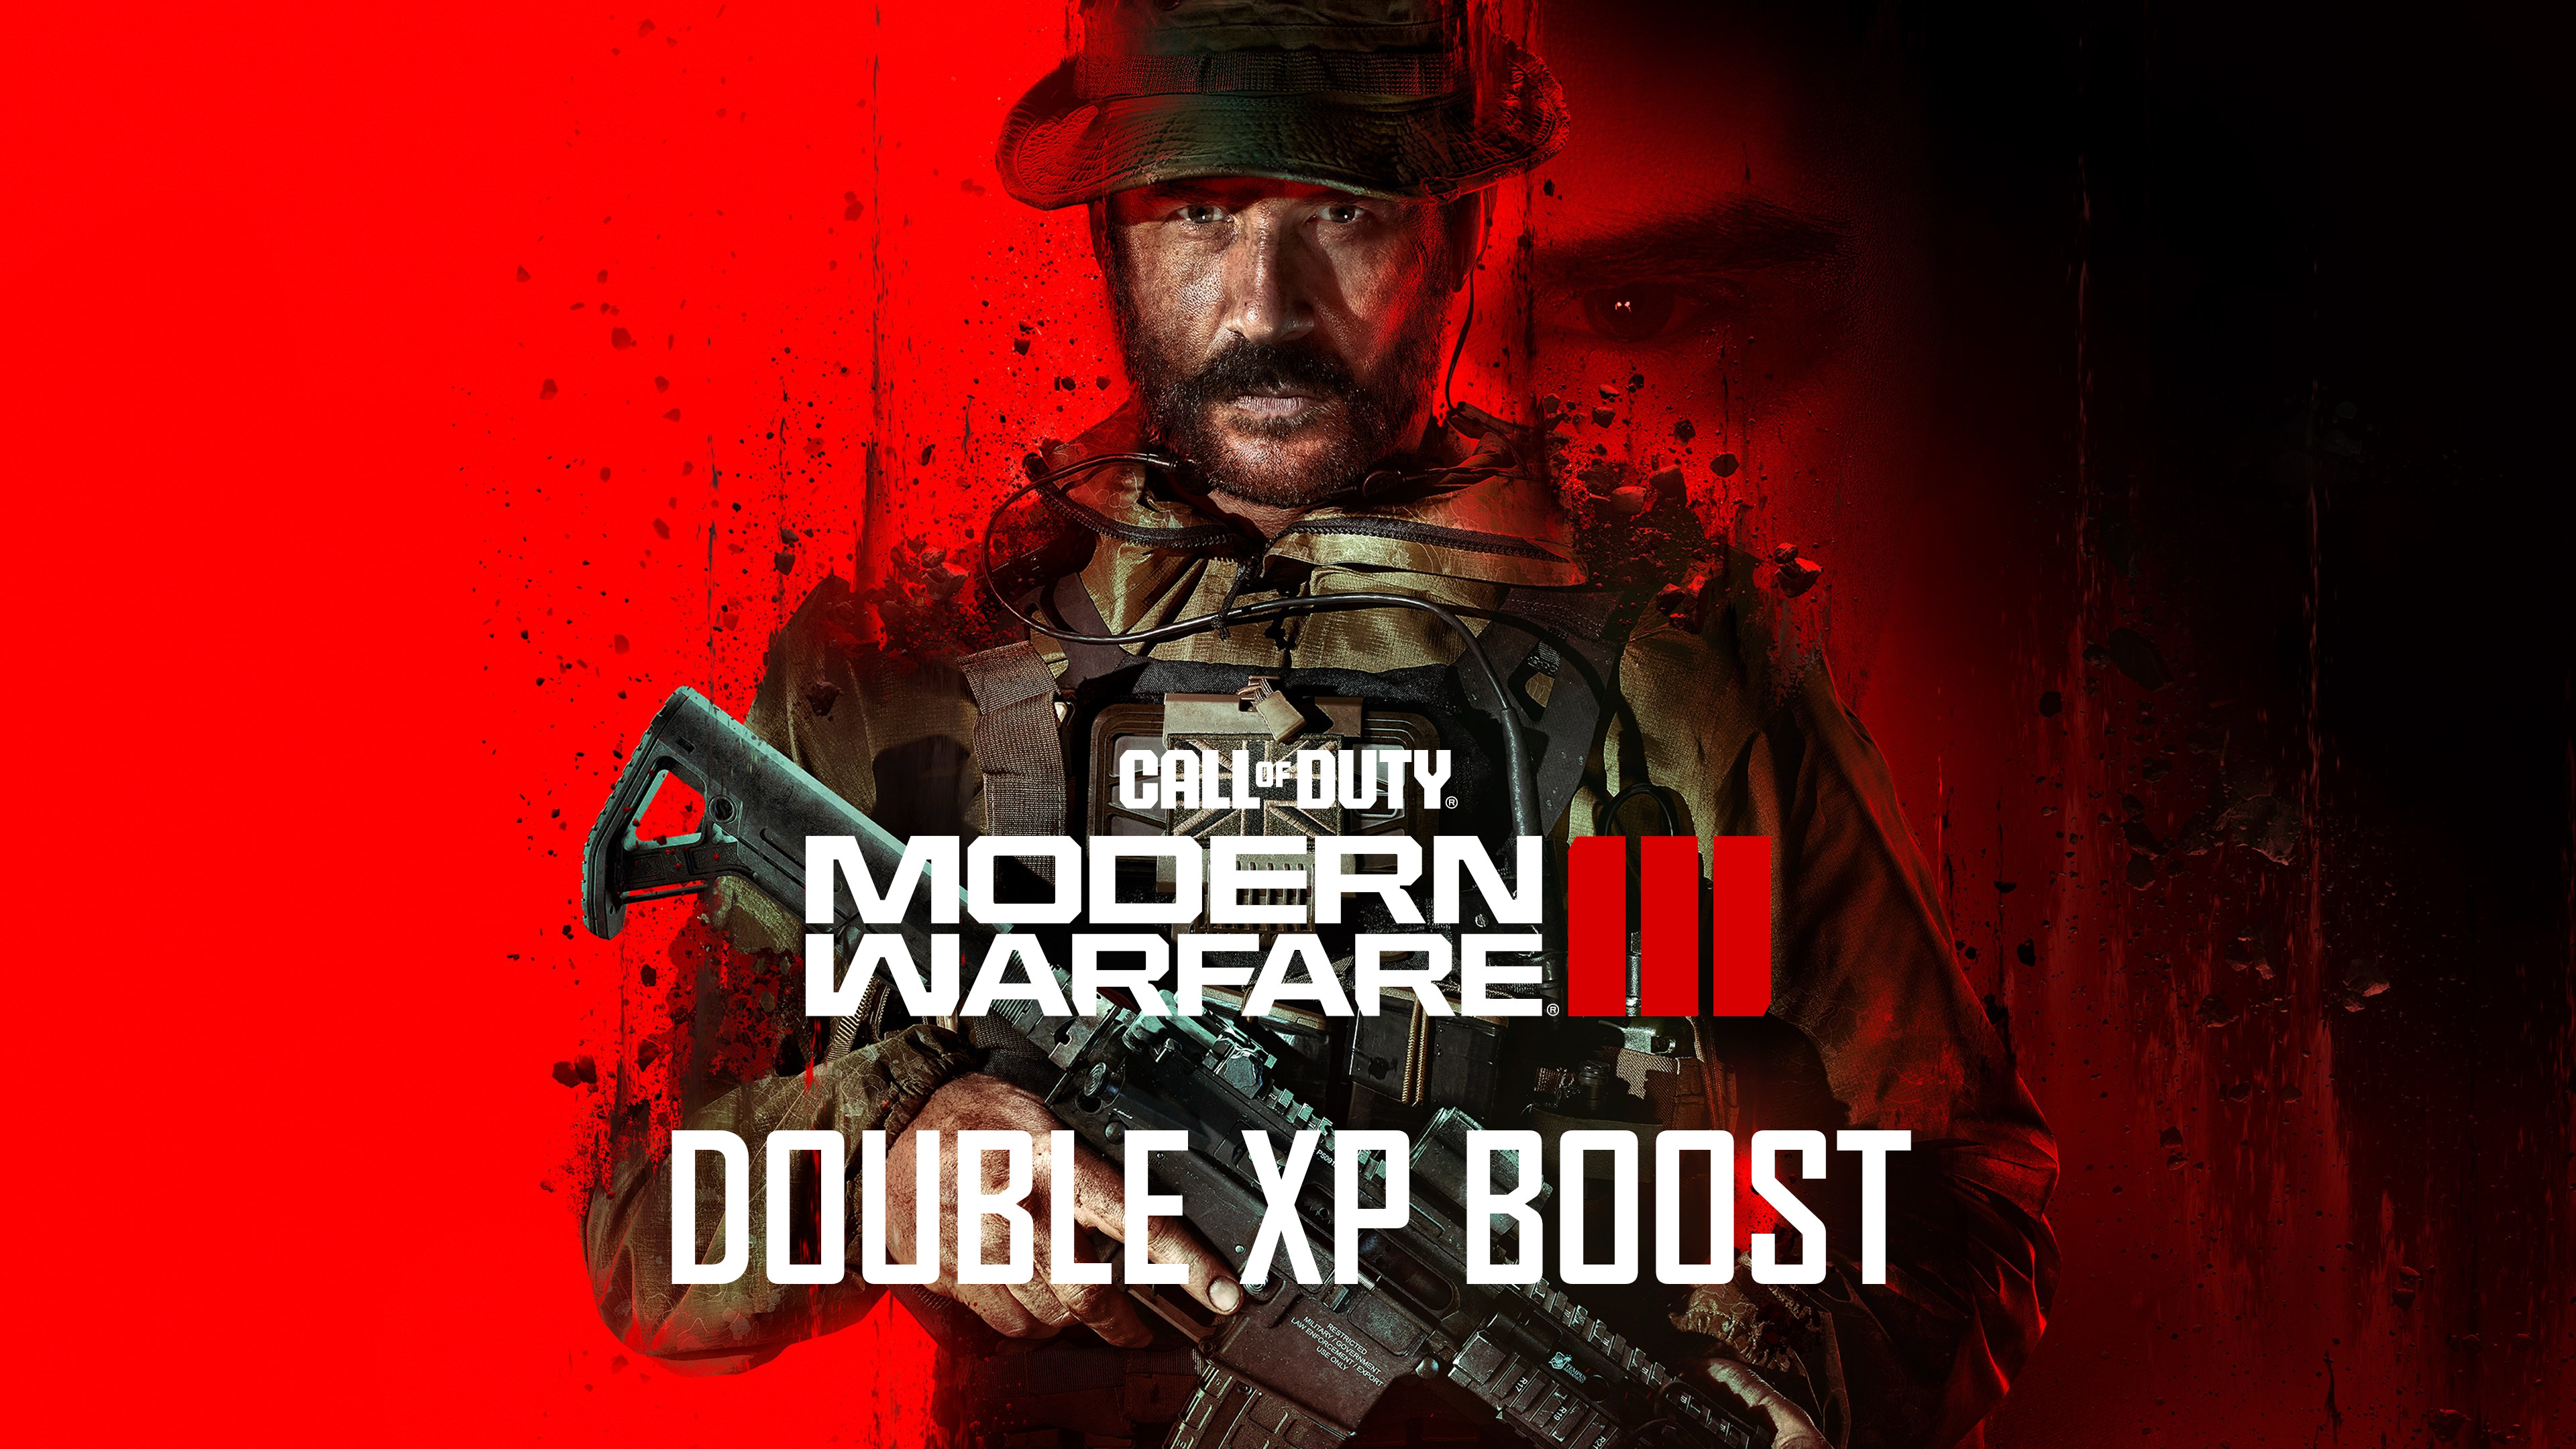 Call of Duty: Modern Warfare III - 5 Hours Double XP Boost PC/PS4/PS5/XBOX One/Series X|S CD Key [USD 4.52]